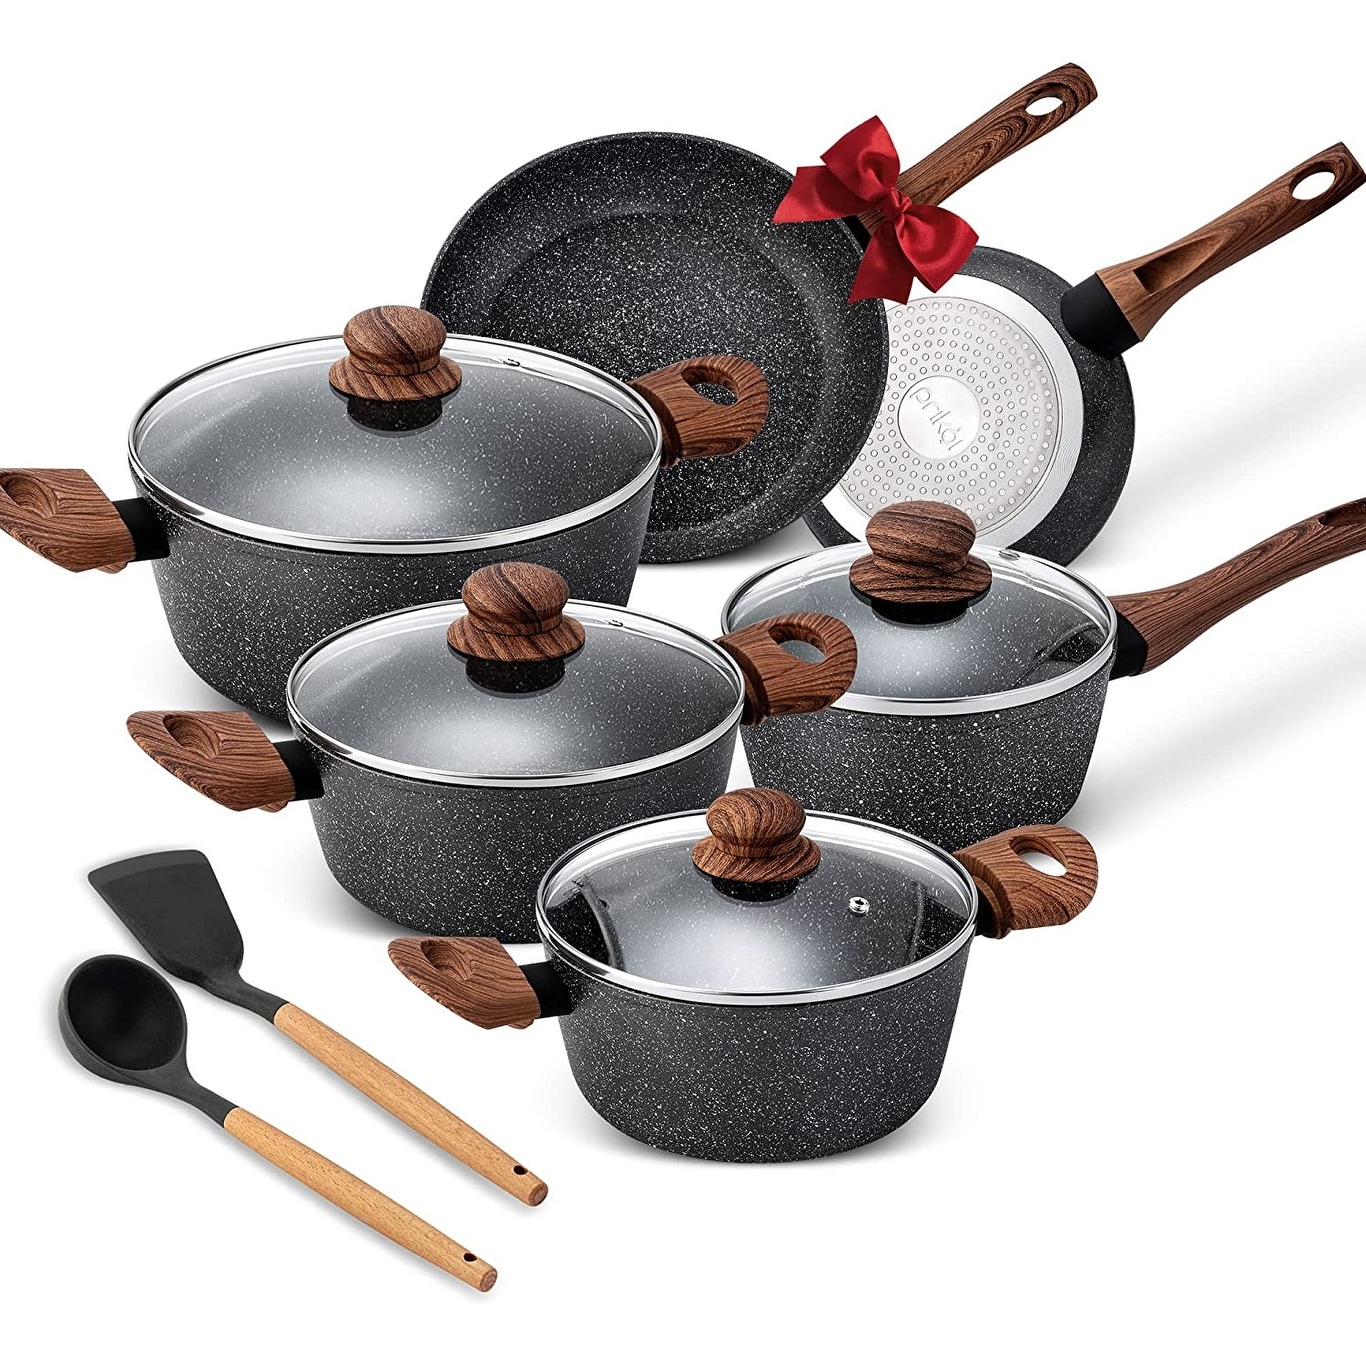 https://ak1.ostkcdn.com/images/products/is/images/direct/ca1e5caf4e5ce11f4fed0071edb61db835763edd/Induction-Cookware-Set%2C-Non-Stick-Granite-Pots-and-Pans-Set-for-Stove%2C-8-Pieces%2CDishwasher-Safe.jpg